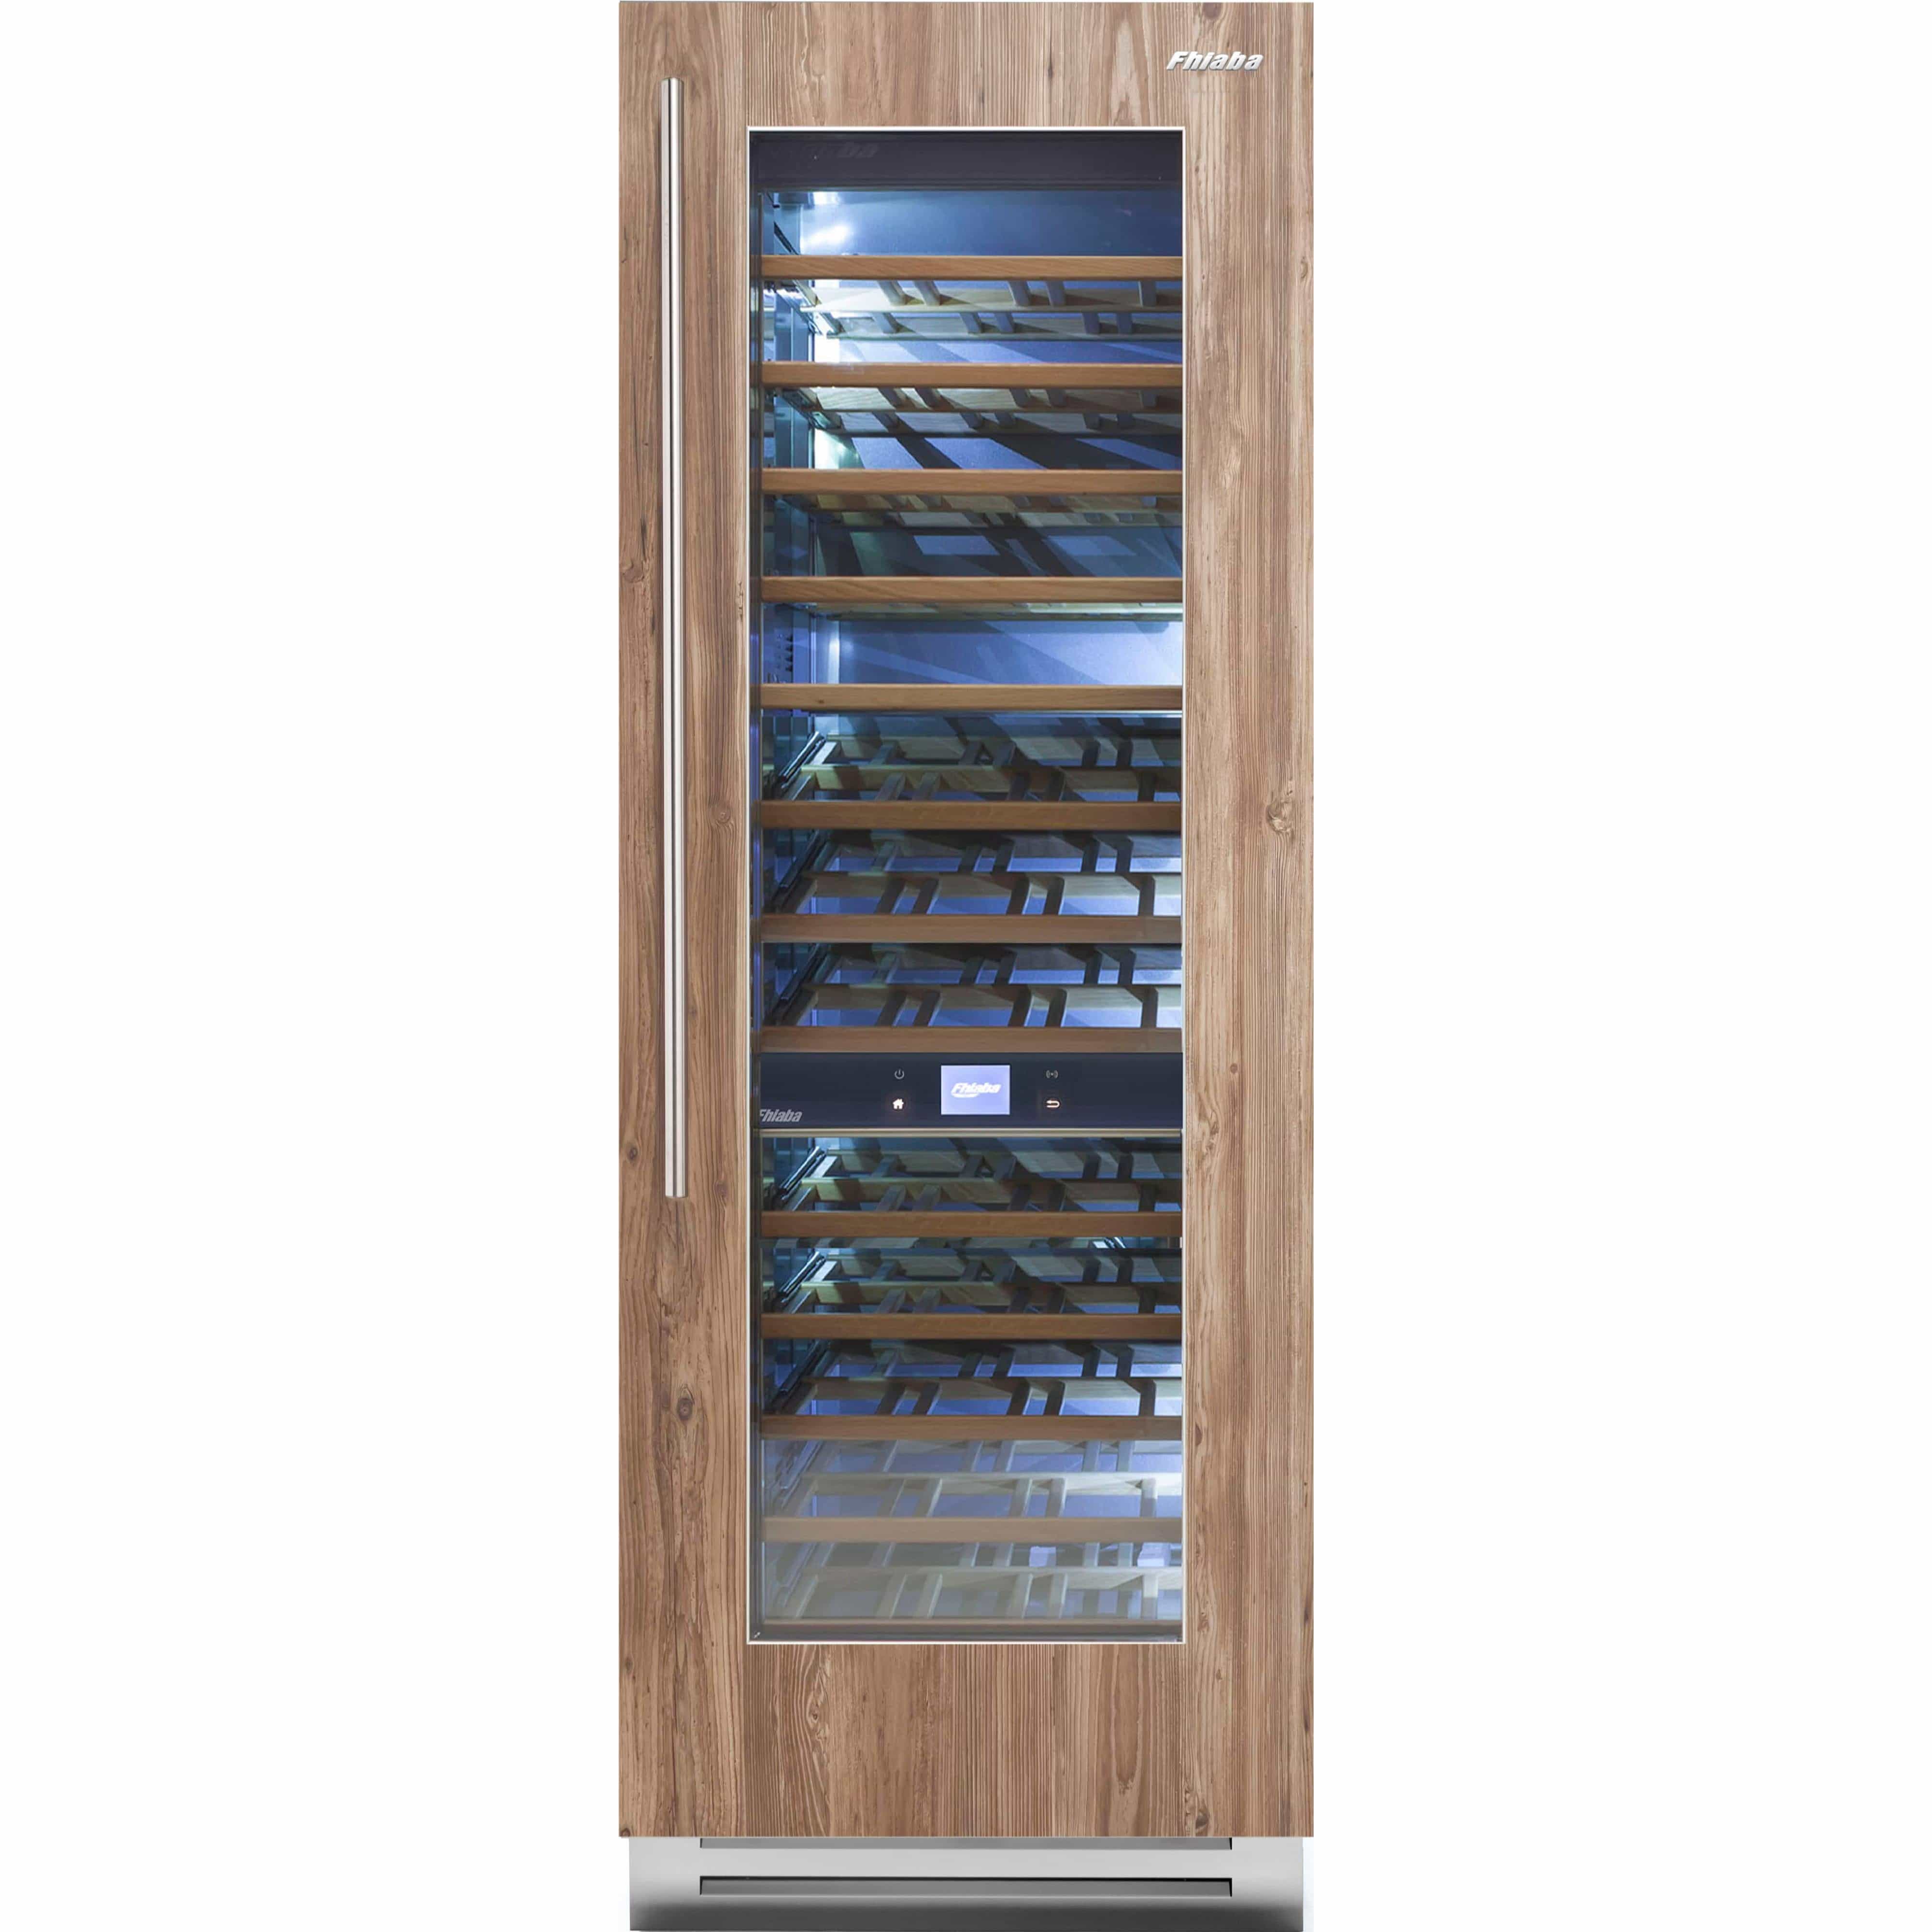 Fhiaba 117-Bottle Integrated Series Wine Cellar with Smart Touch TFT Display FI30WCC-RO2 Wine Storage FI30WCCRO2 Luxury Appliances Direct